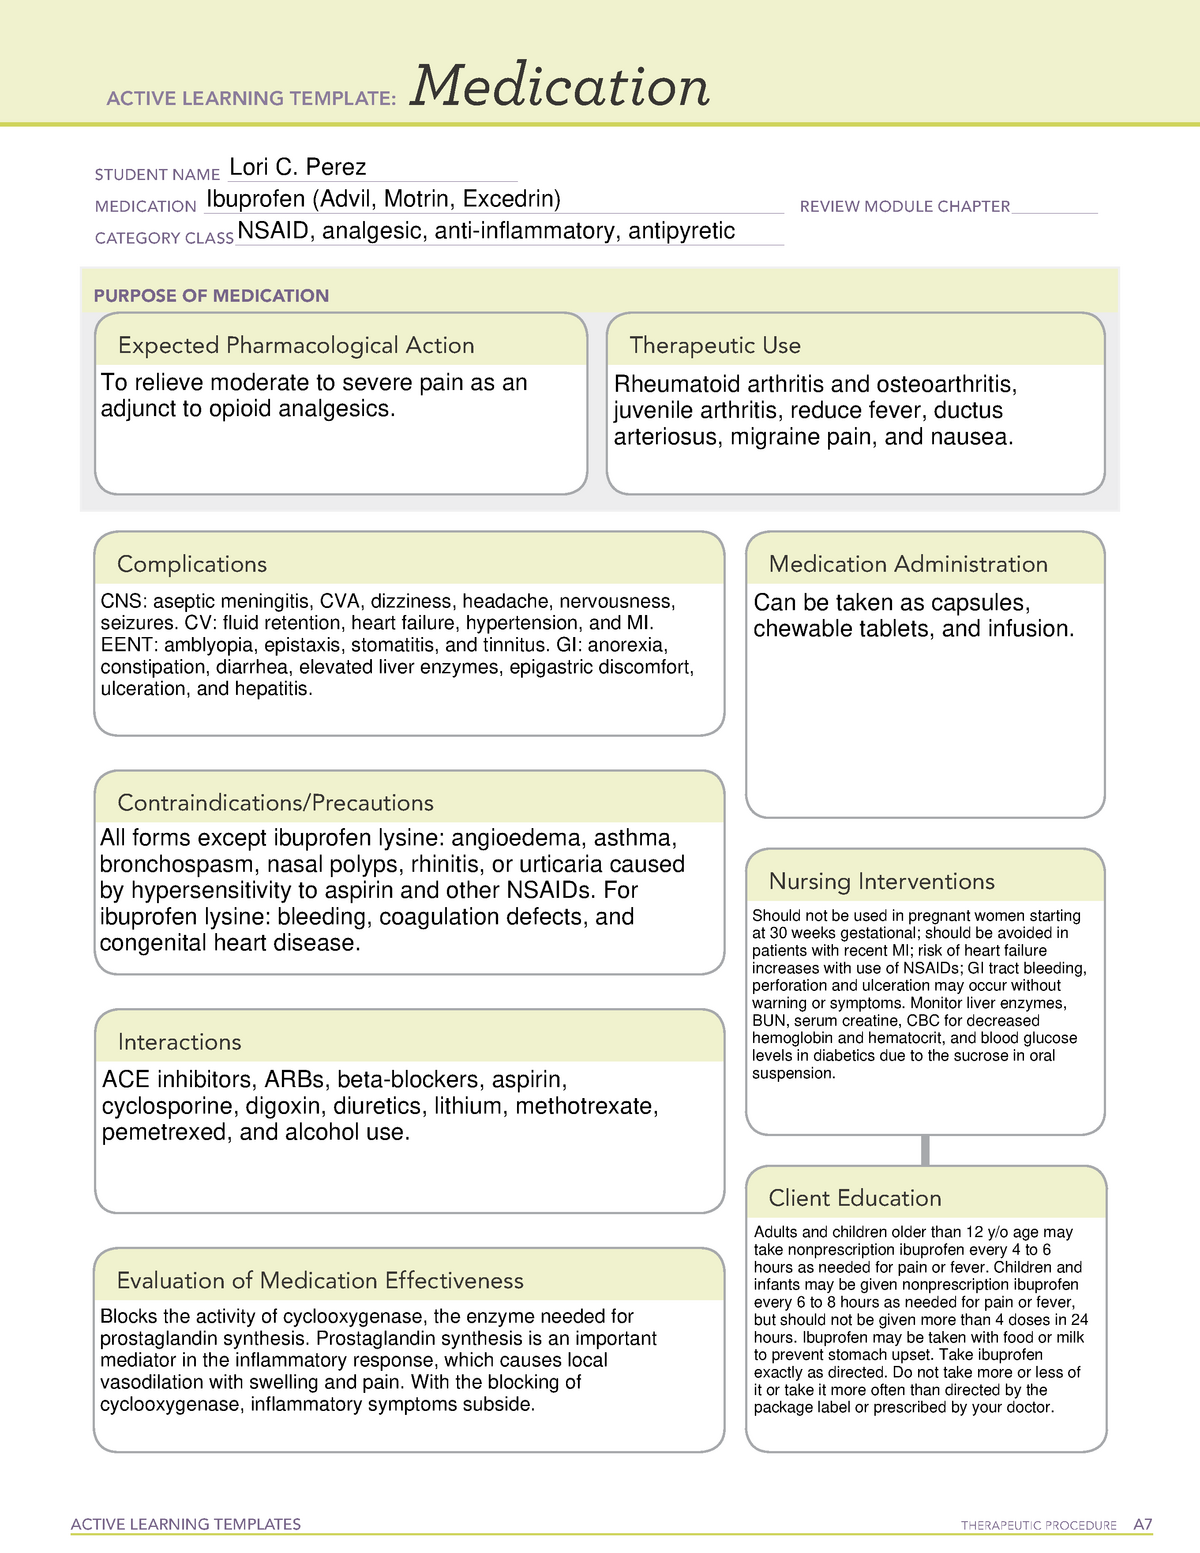 med-card-ibuprofen-completed-template-active-learning-templates